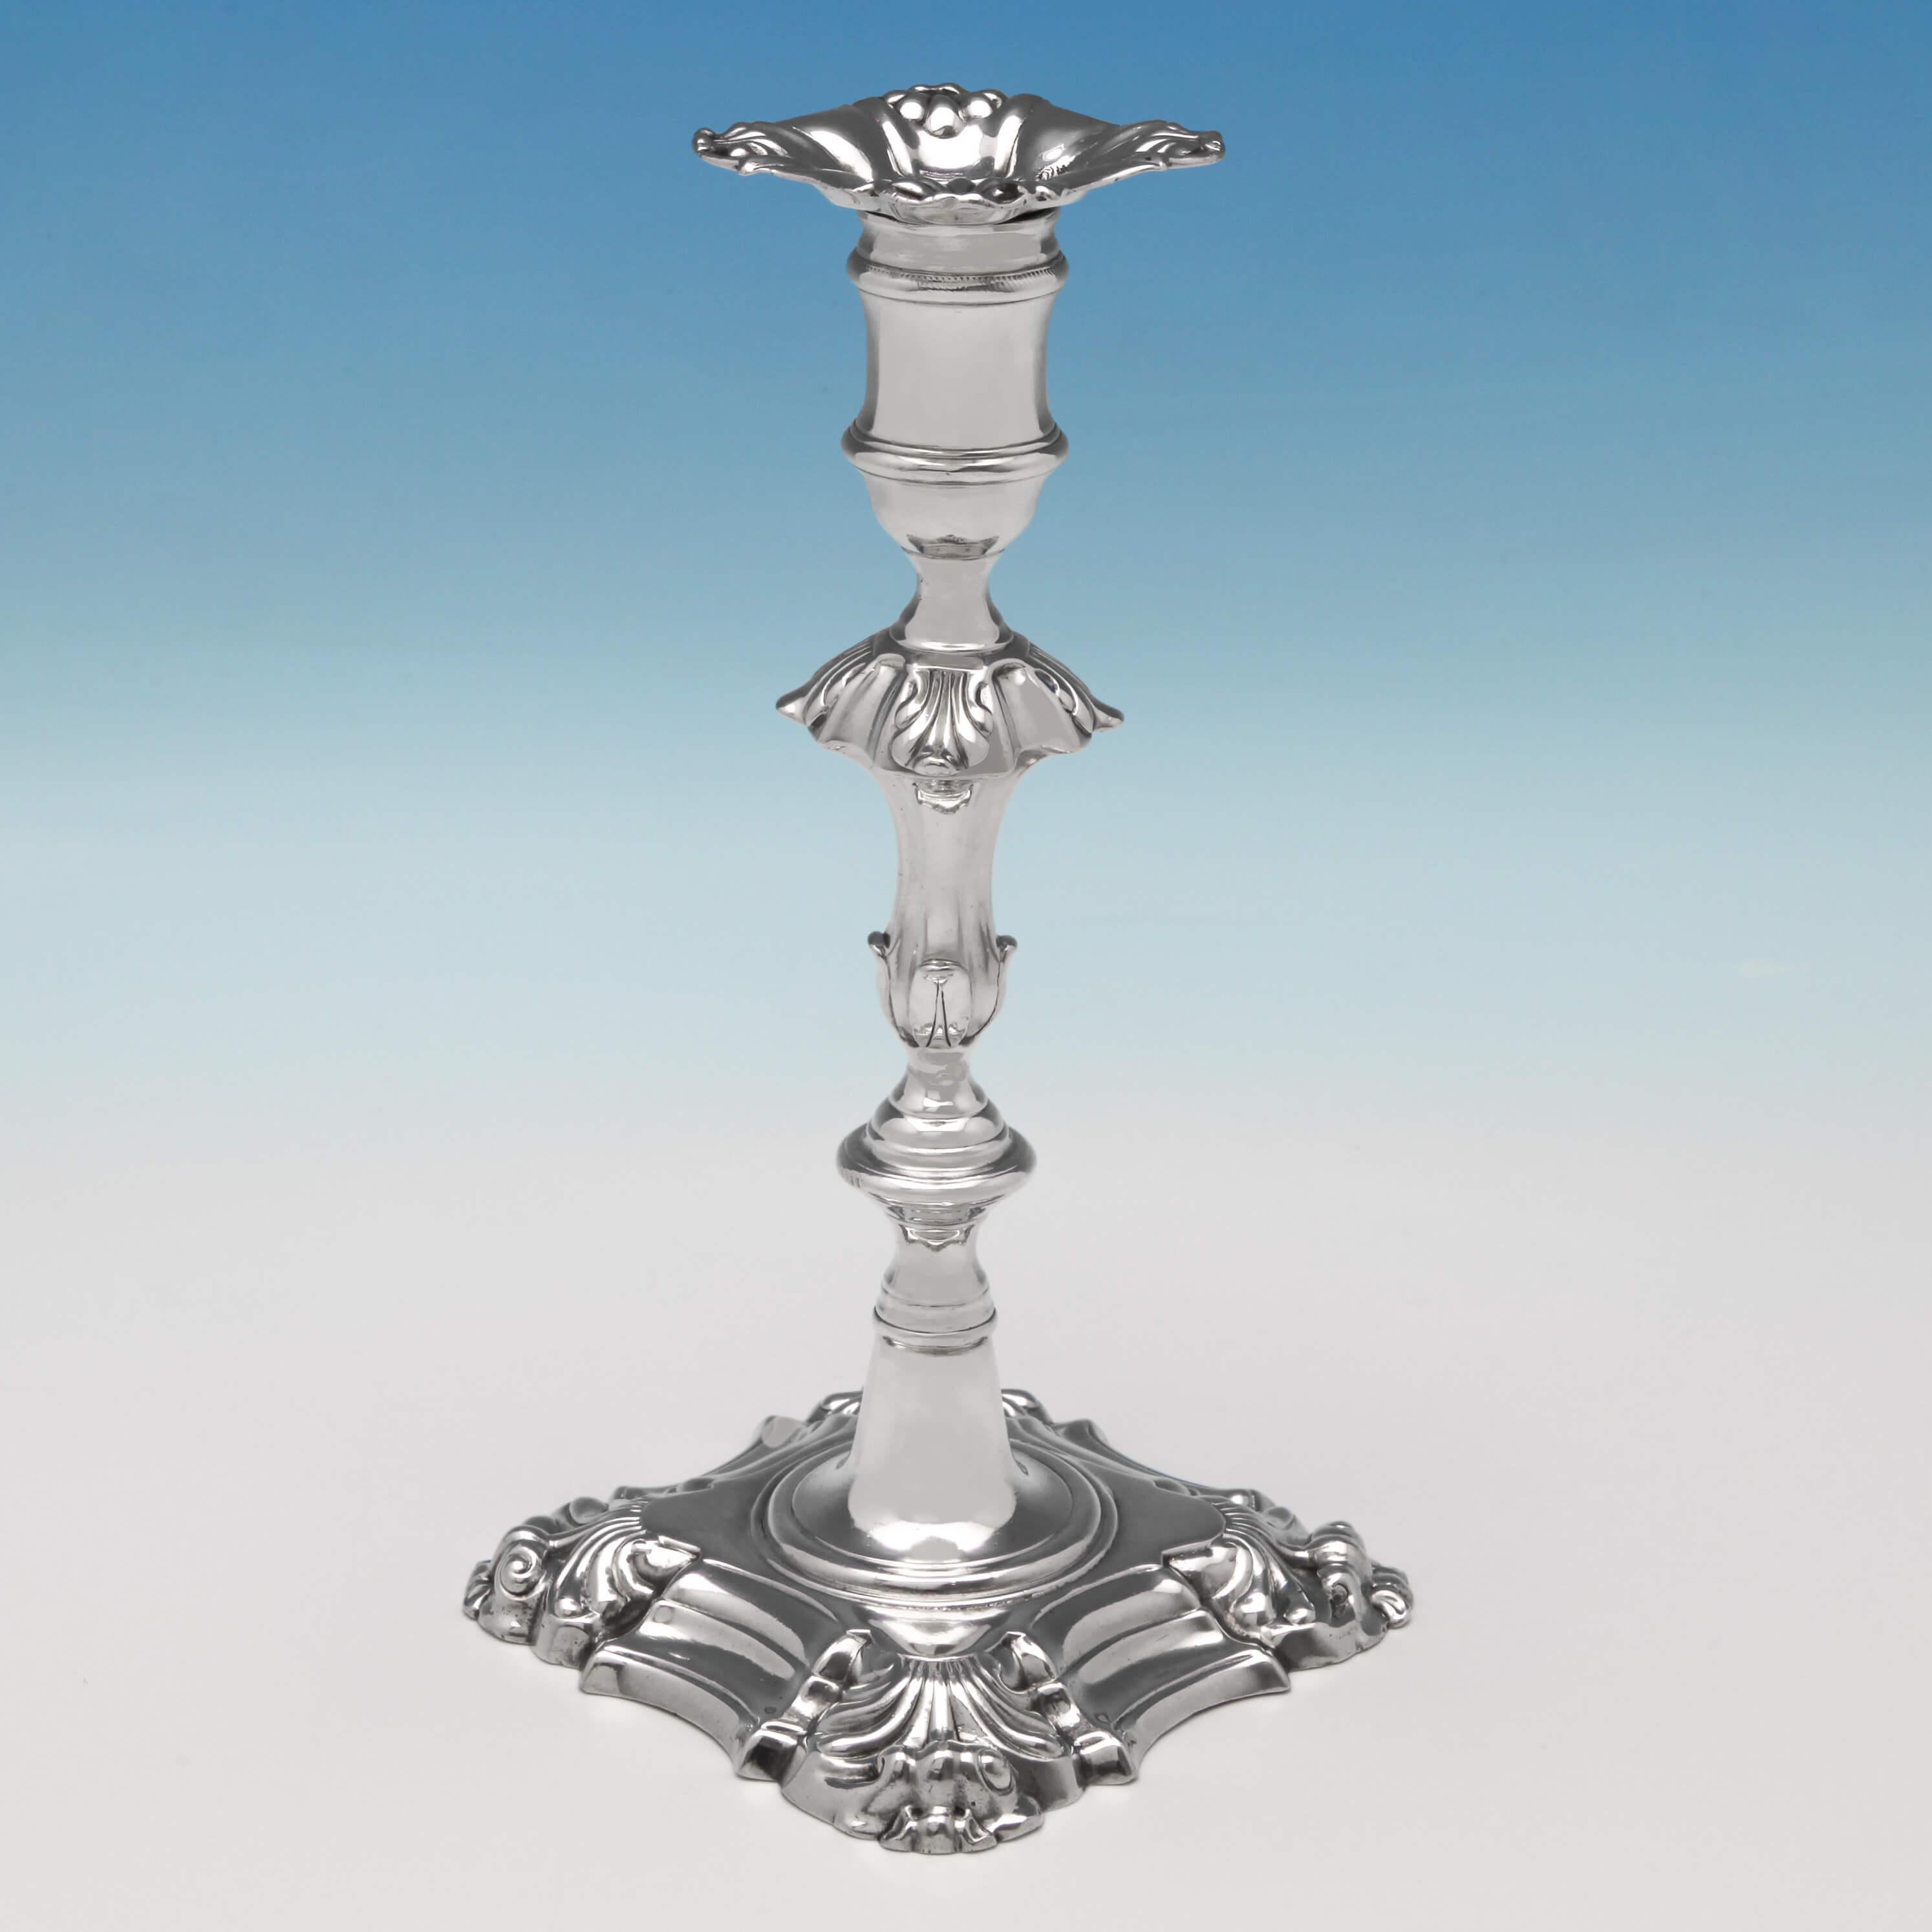 Hallmarked in London in 1870 by Frederick Brasted, this heavy, cast pair of antique, Victorian, sterling silver candlesticks are in the George II 